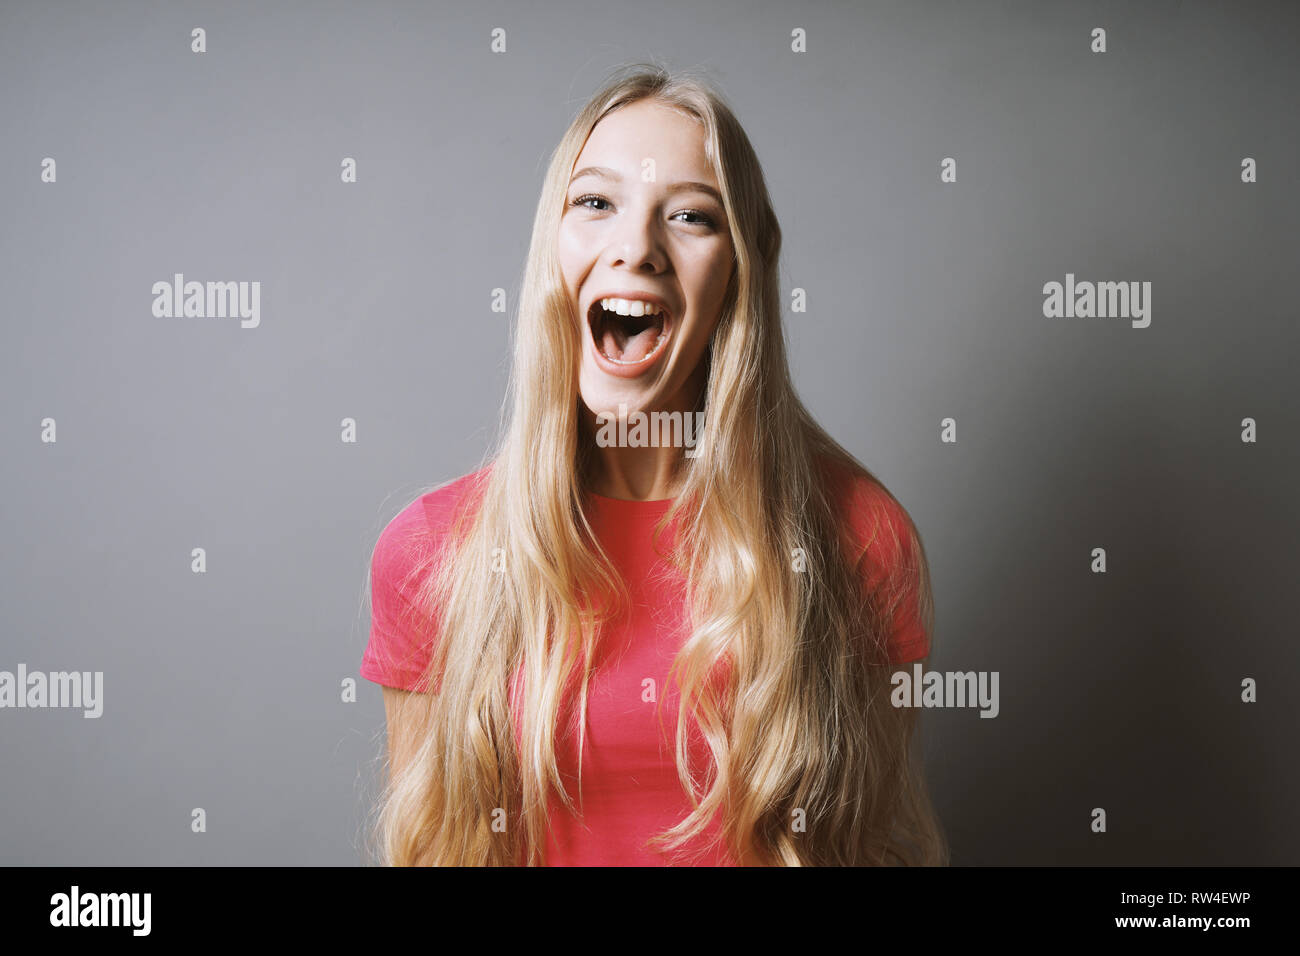 excited young woman whoop of joy or shout of delight Stock Photo